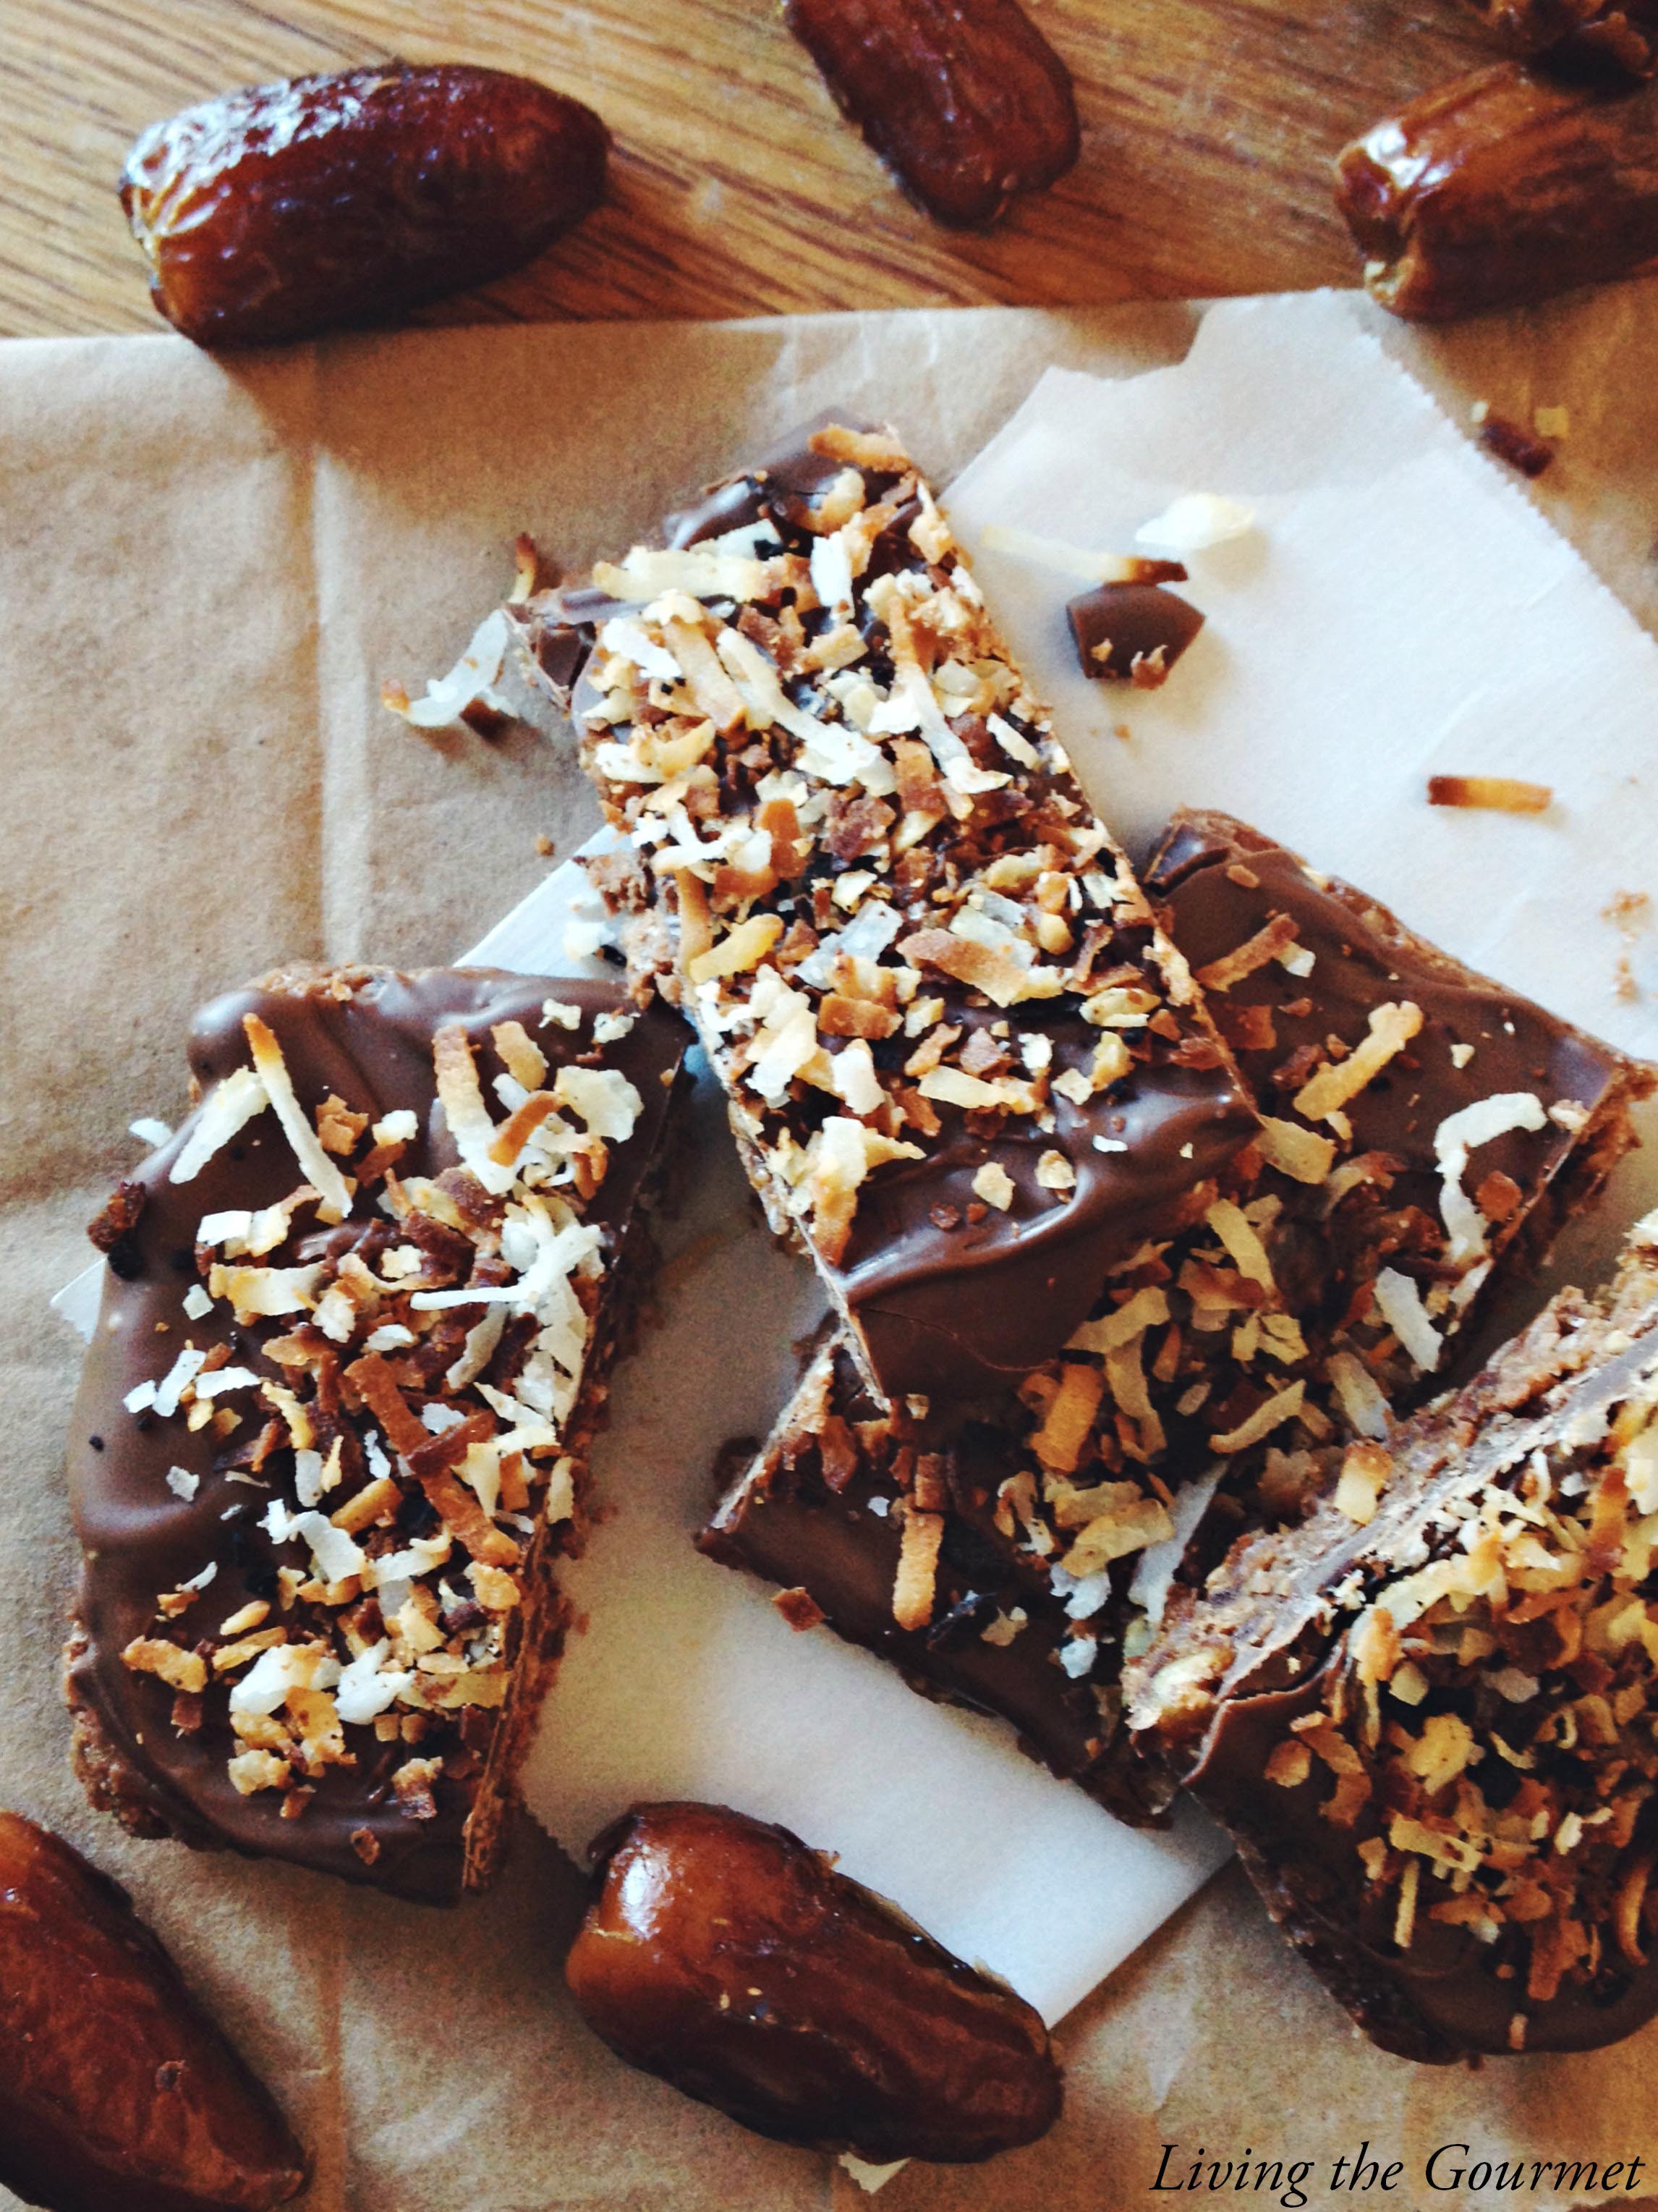 Living the Gourmet: Cocoa Protein Bars